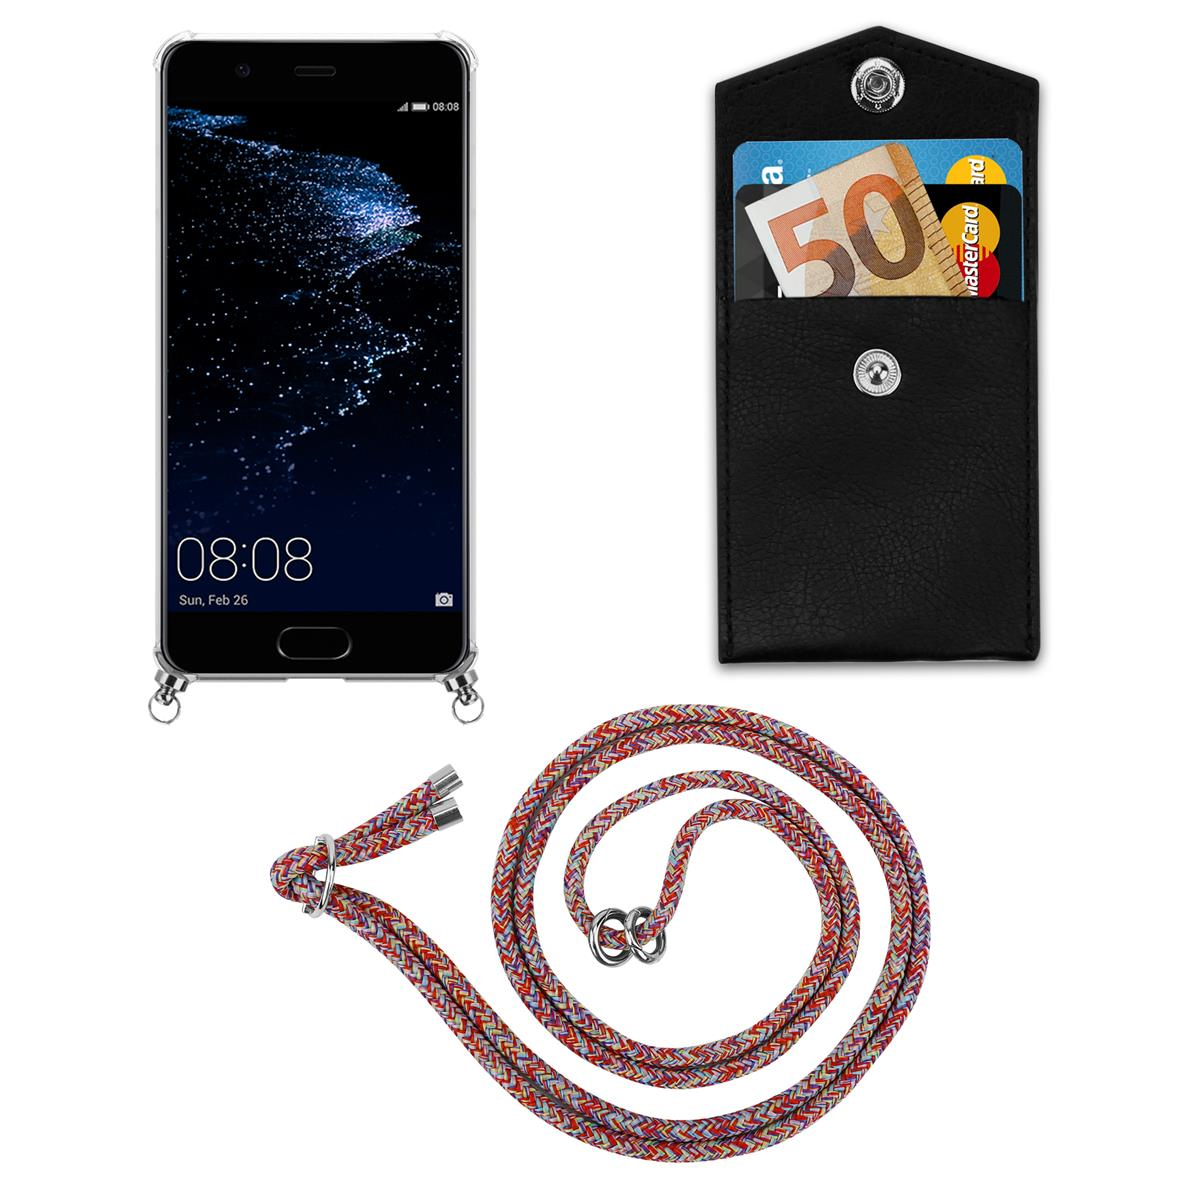 Huawei, Silber und Kordel abnehmbarer Hülle, Ringen, CADORABO Handy PLUS, P10 PARROT Band mit Kette COLORFUL Backcover,